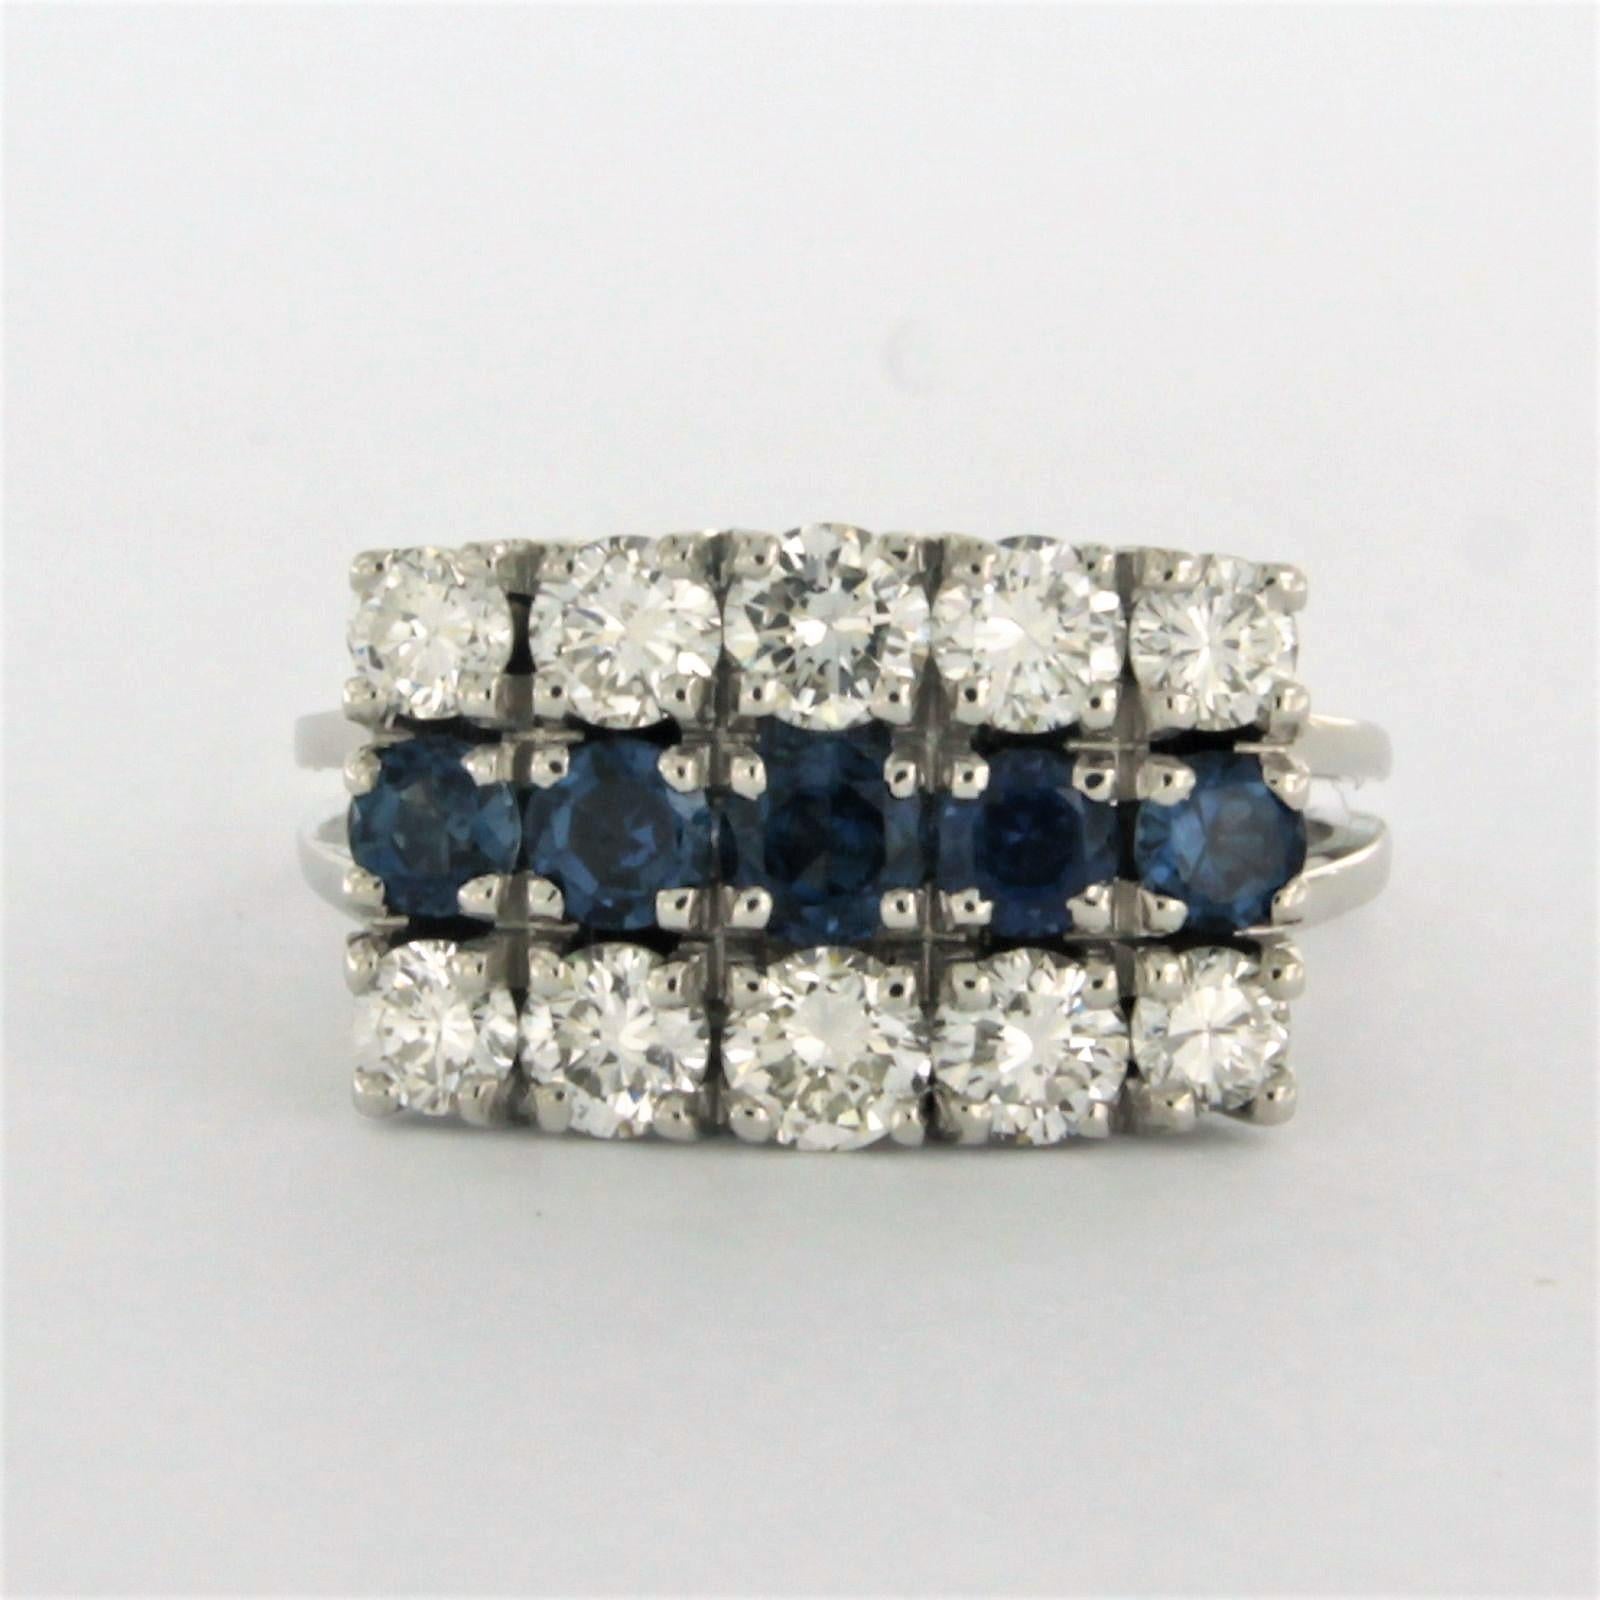 18k white gold ring set met sapphire and brilliant cut diamonds 1.00 ct F/G VS/SI - ring size U.S. 6 - EU 16.5 (52)

Detailed description

the top of the ring is 1.0 cm wide, and 5.5 mm high

weight 7.6 grams

ring size U.S. 6 - EU 16.5 (52), ring